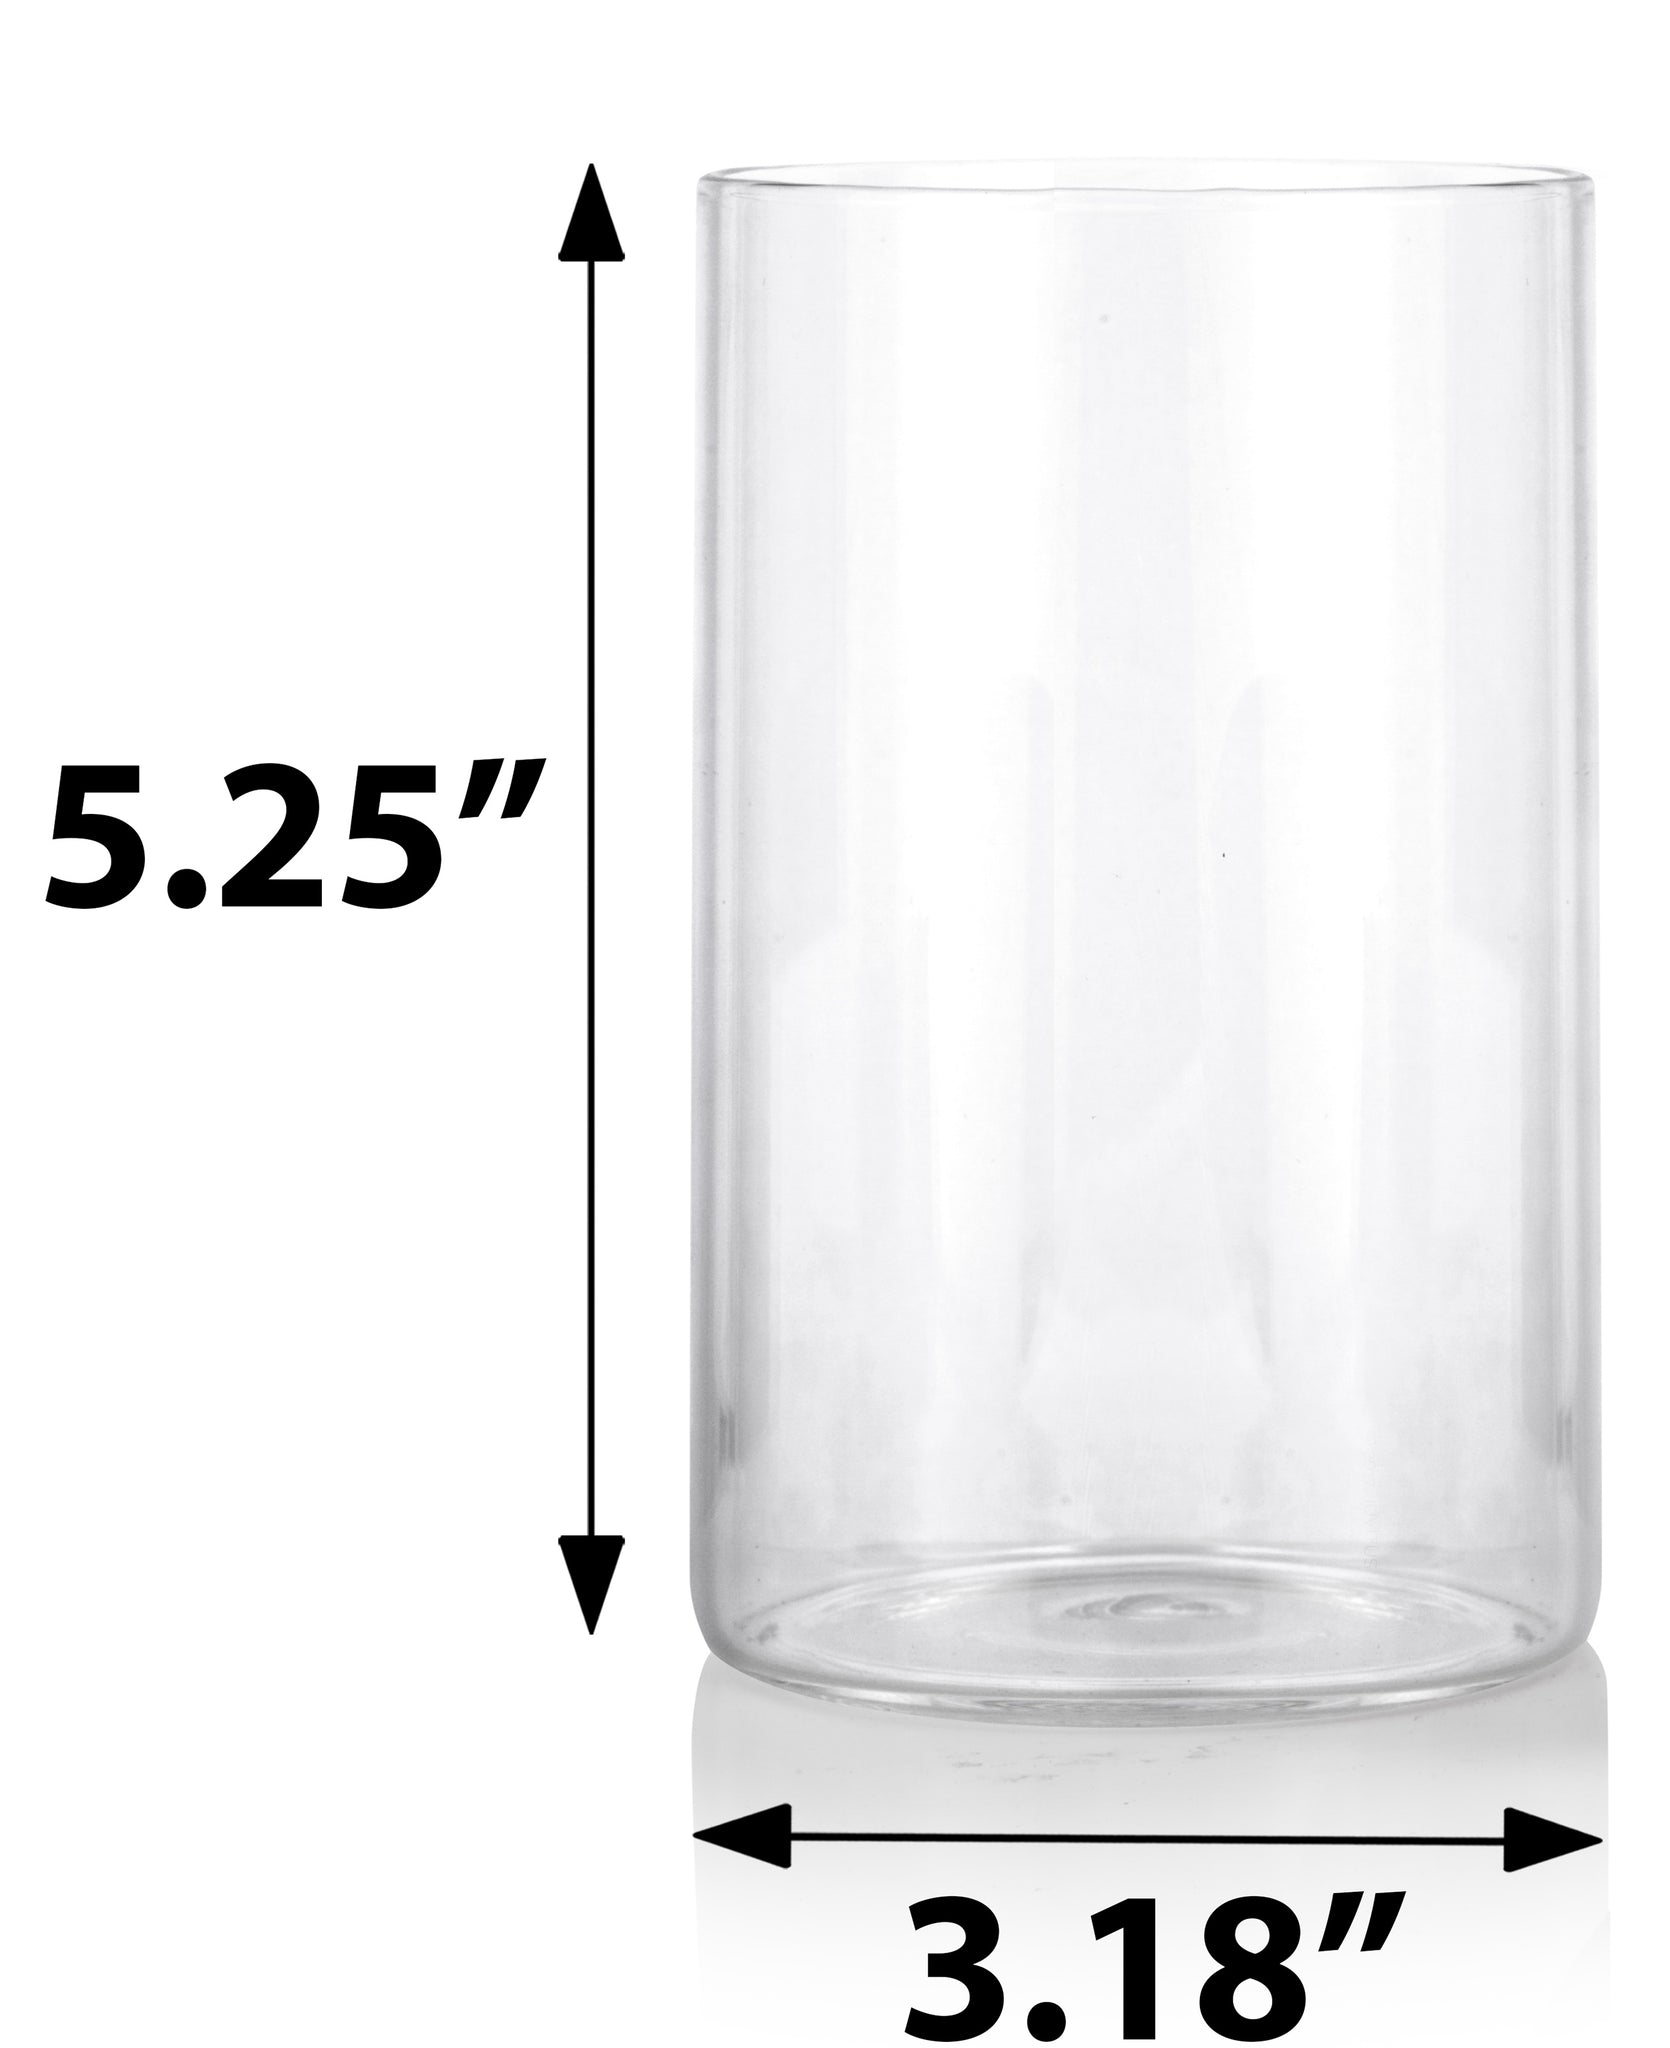 4 oz Premium Borosilicate Clear Glass Drinking Cup (6 Pack)